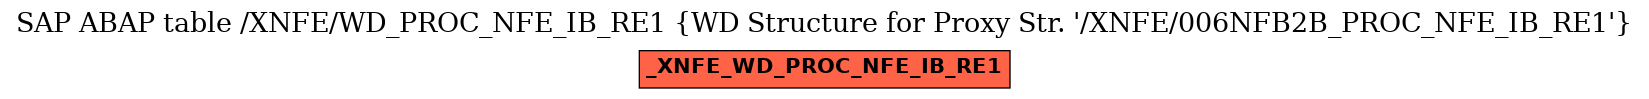 E-R Diagram for table /XNFE/WD_PROC_NFE_IB_RE1 (WD Structure for Proxy Str. 